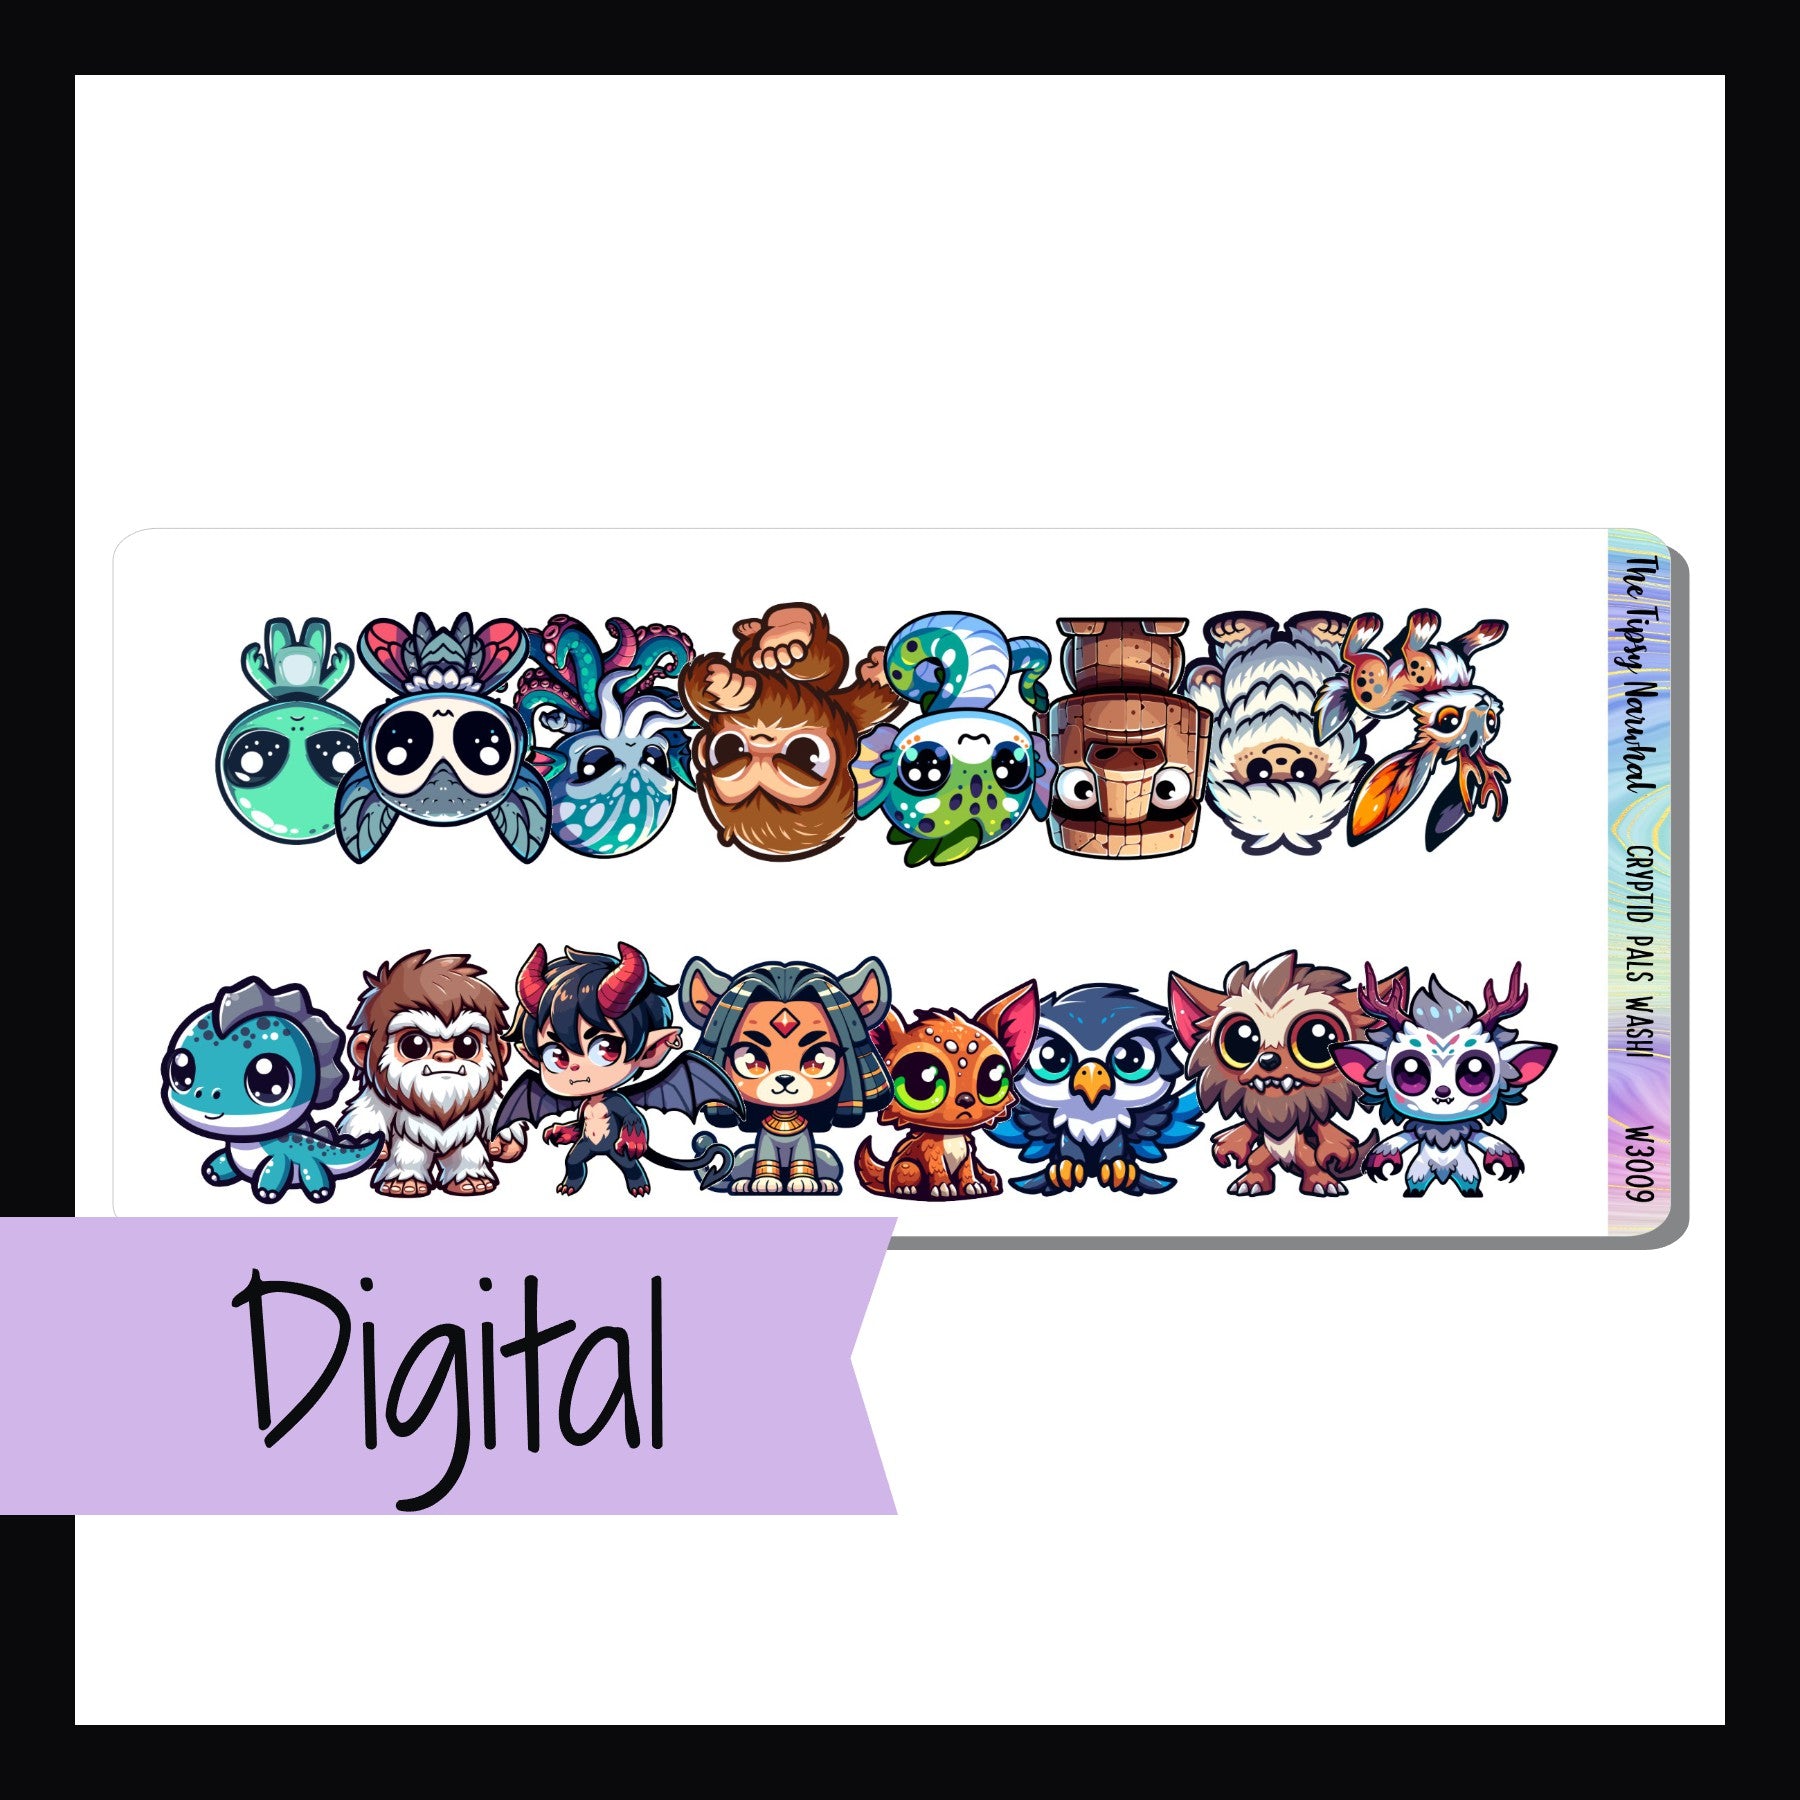 The Digital Cryptid Pals Washi Sheet is a digital printable version of the Cryptid Pals Washi Sheet.  It features two washi strips each approximately 7 inches long.  Each strip features a collection of adorable cryptid creatures. 